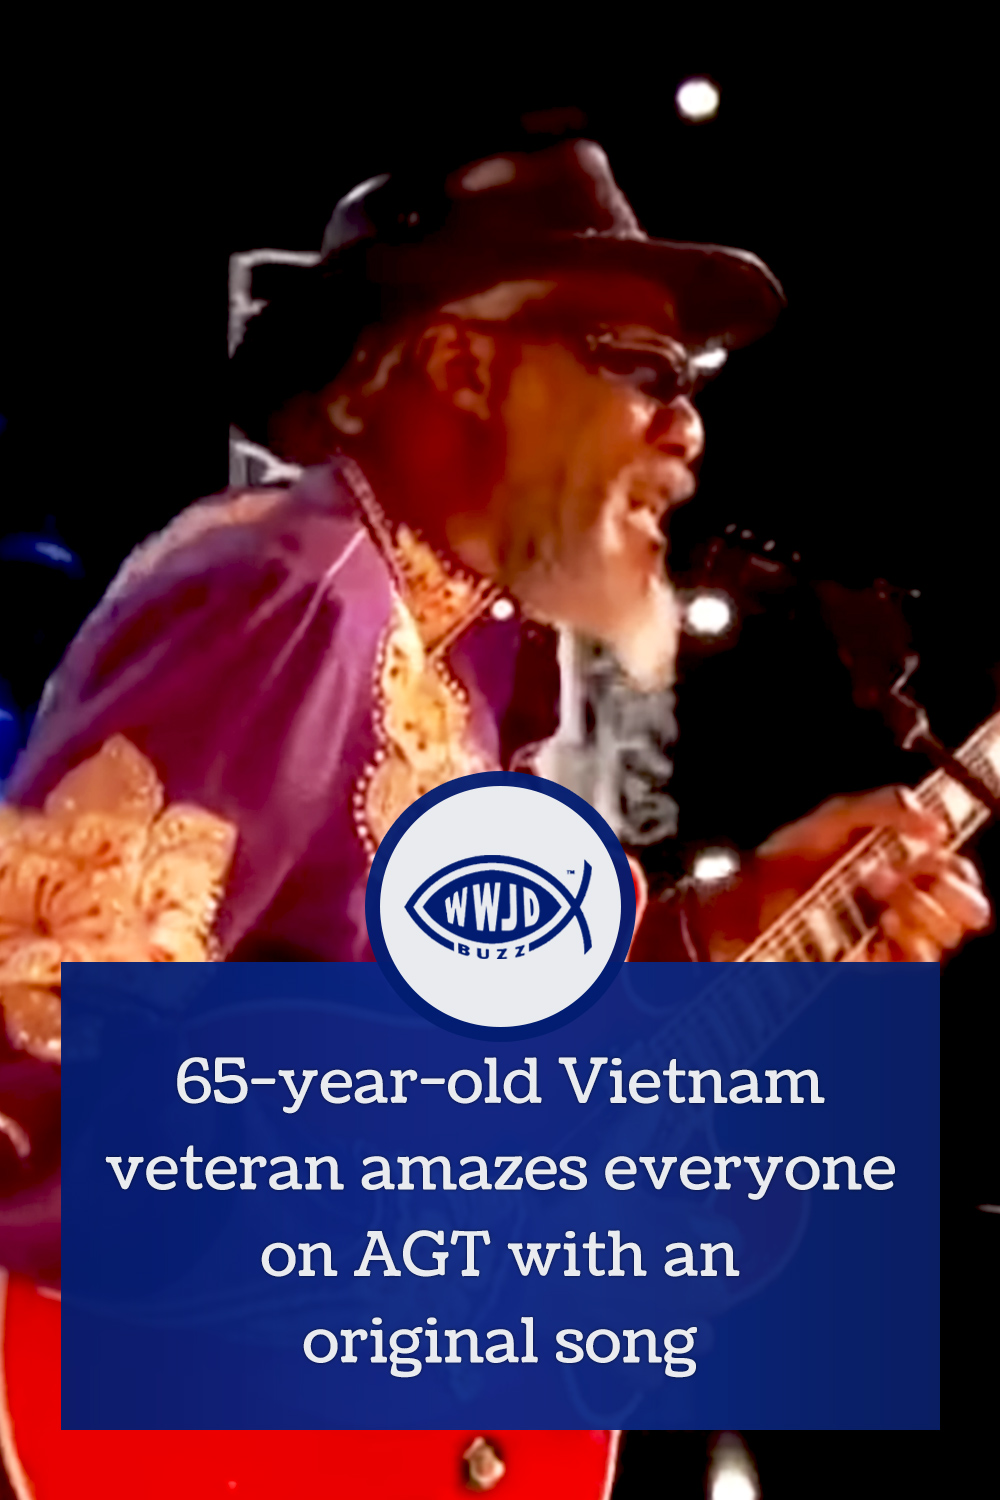 65-year-old Vietnam veteran amazes everyone on AGT with an original song